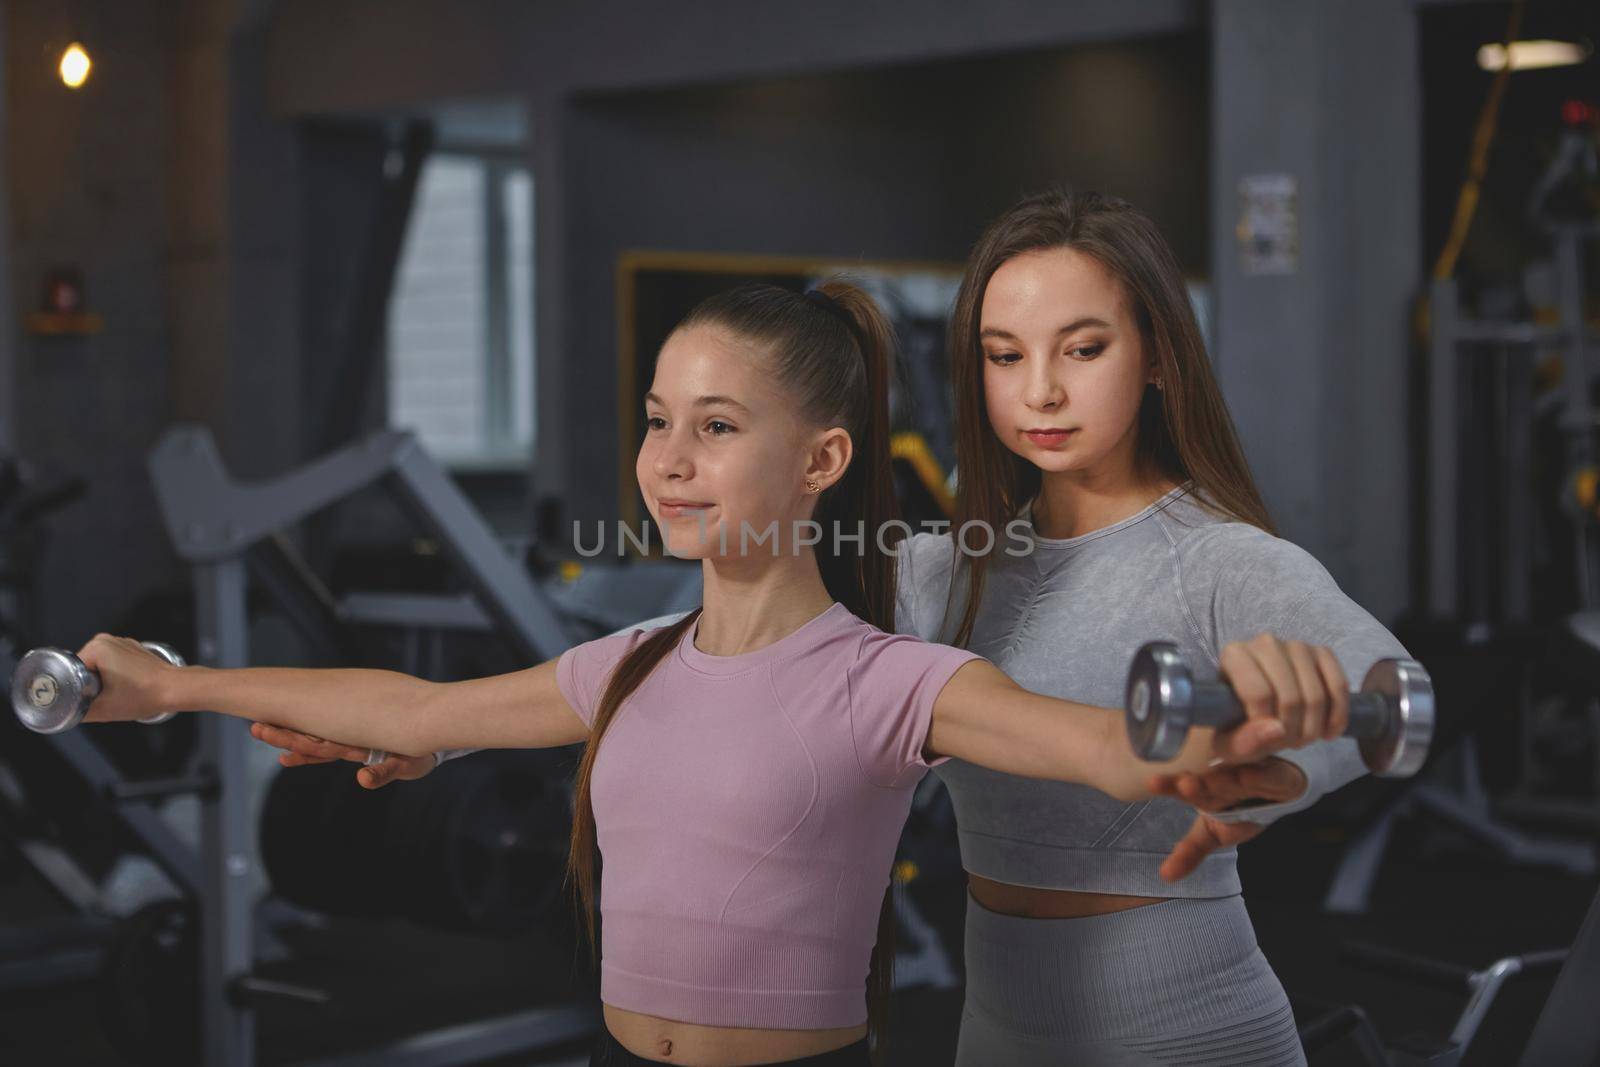 Professional sportswoman supervising teenage girl during gym workout, doing dumbbells exercise